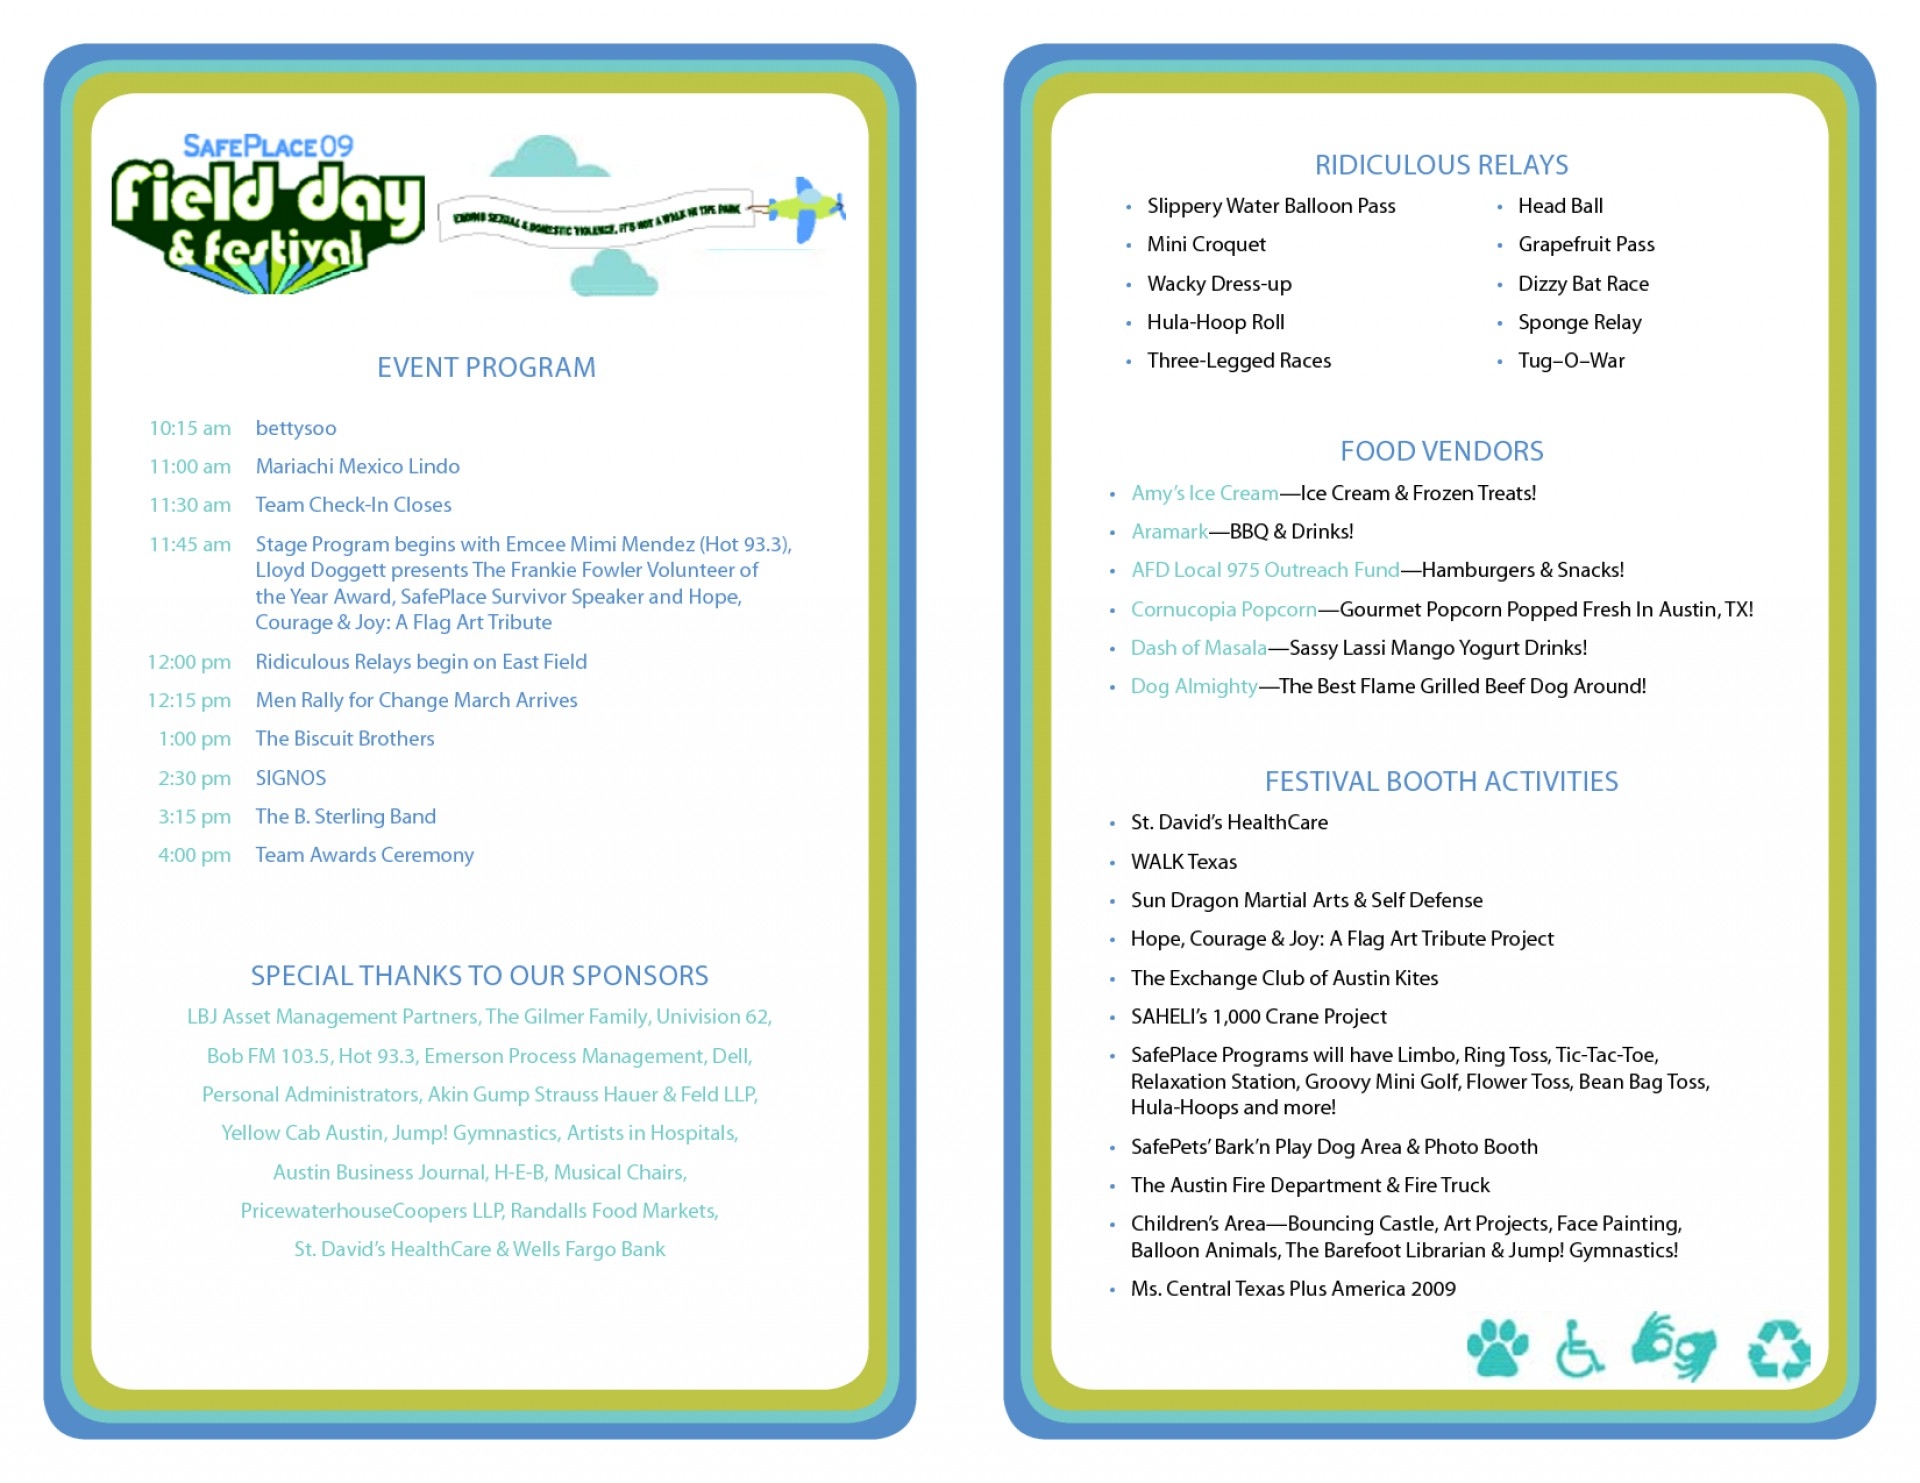 020 Event Program Template Word Sample Alternative Pictures Epic